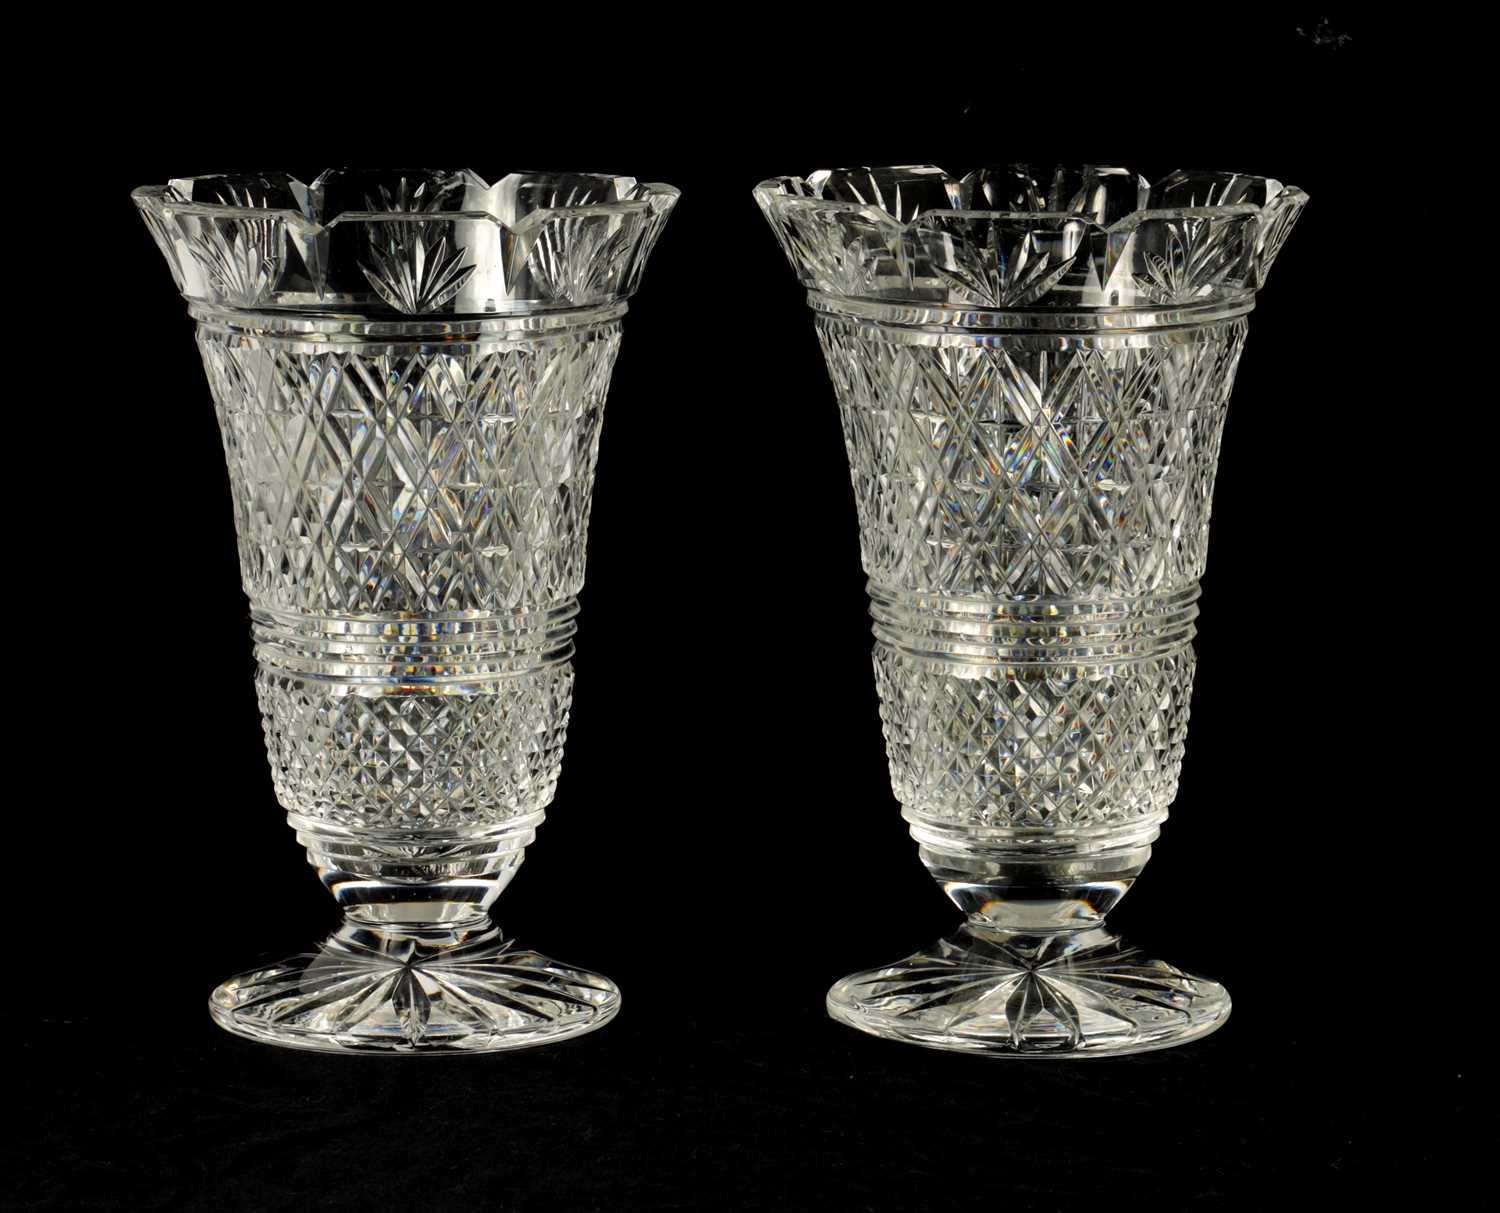 A GOOD PAIR OF WATERFORD CUT CRYSTAL TRUMPET-SHAPED FOOTED VASES